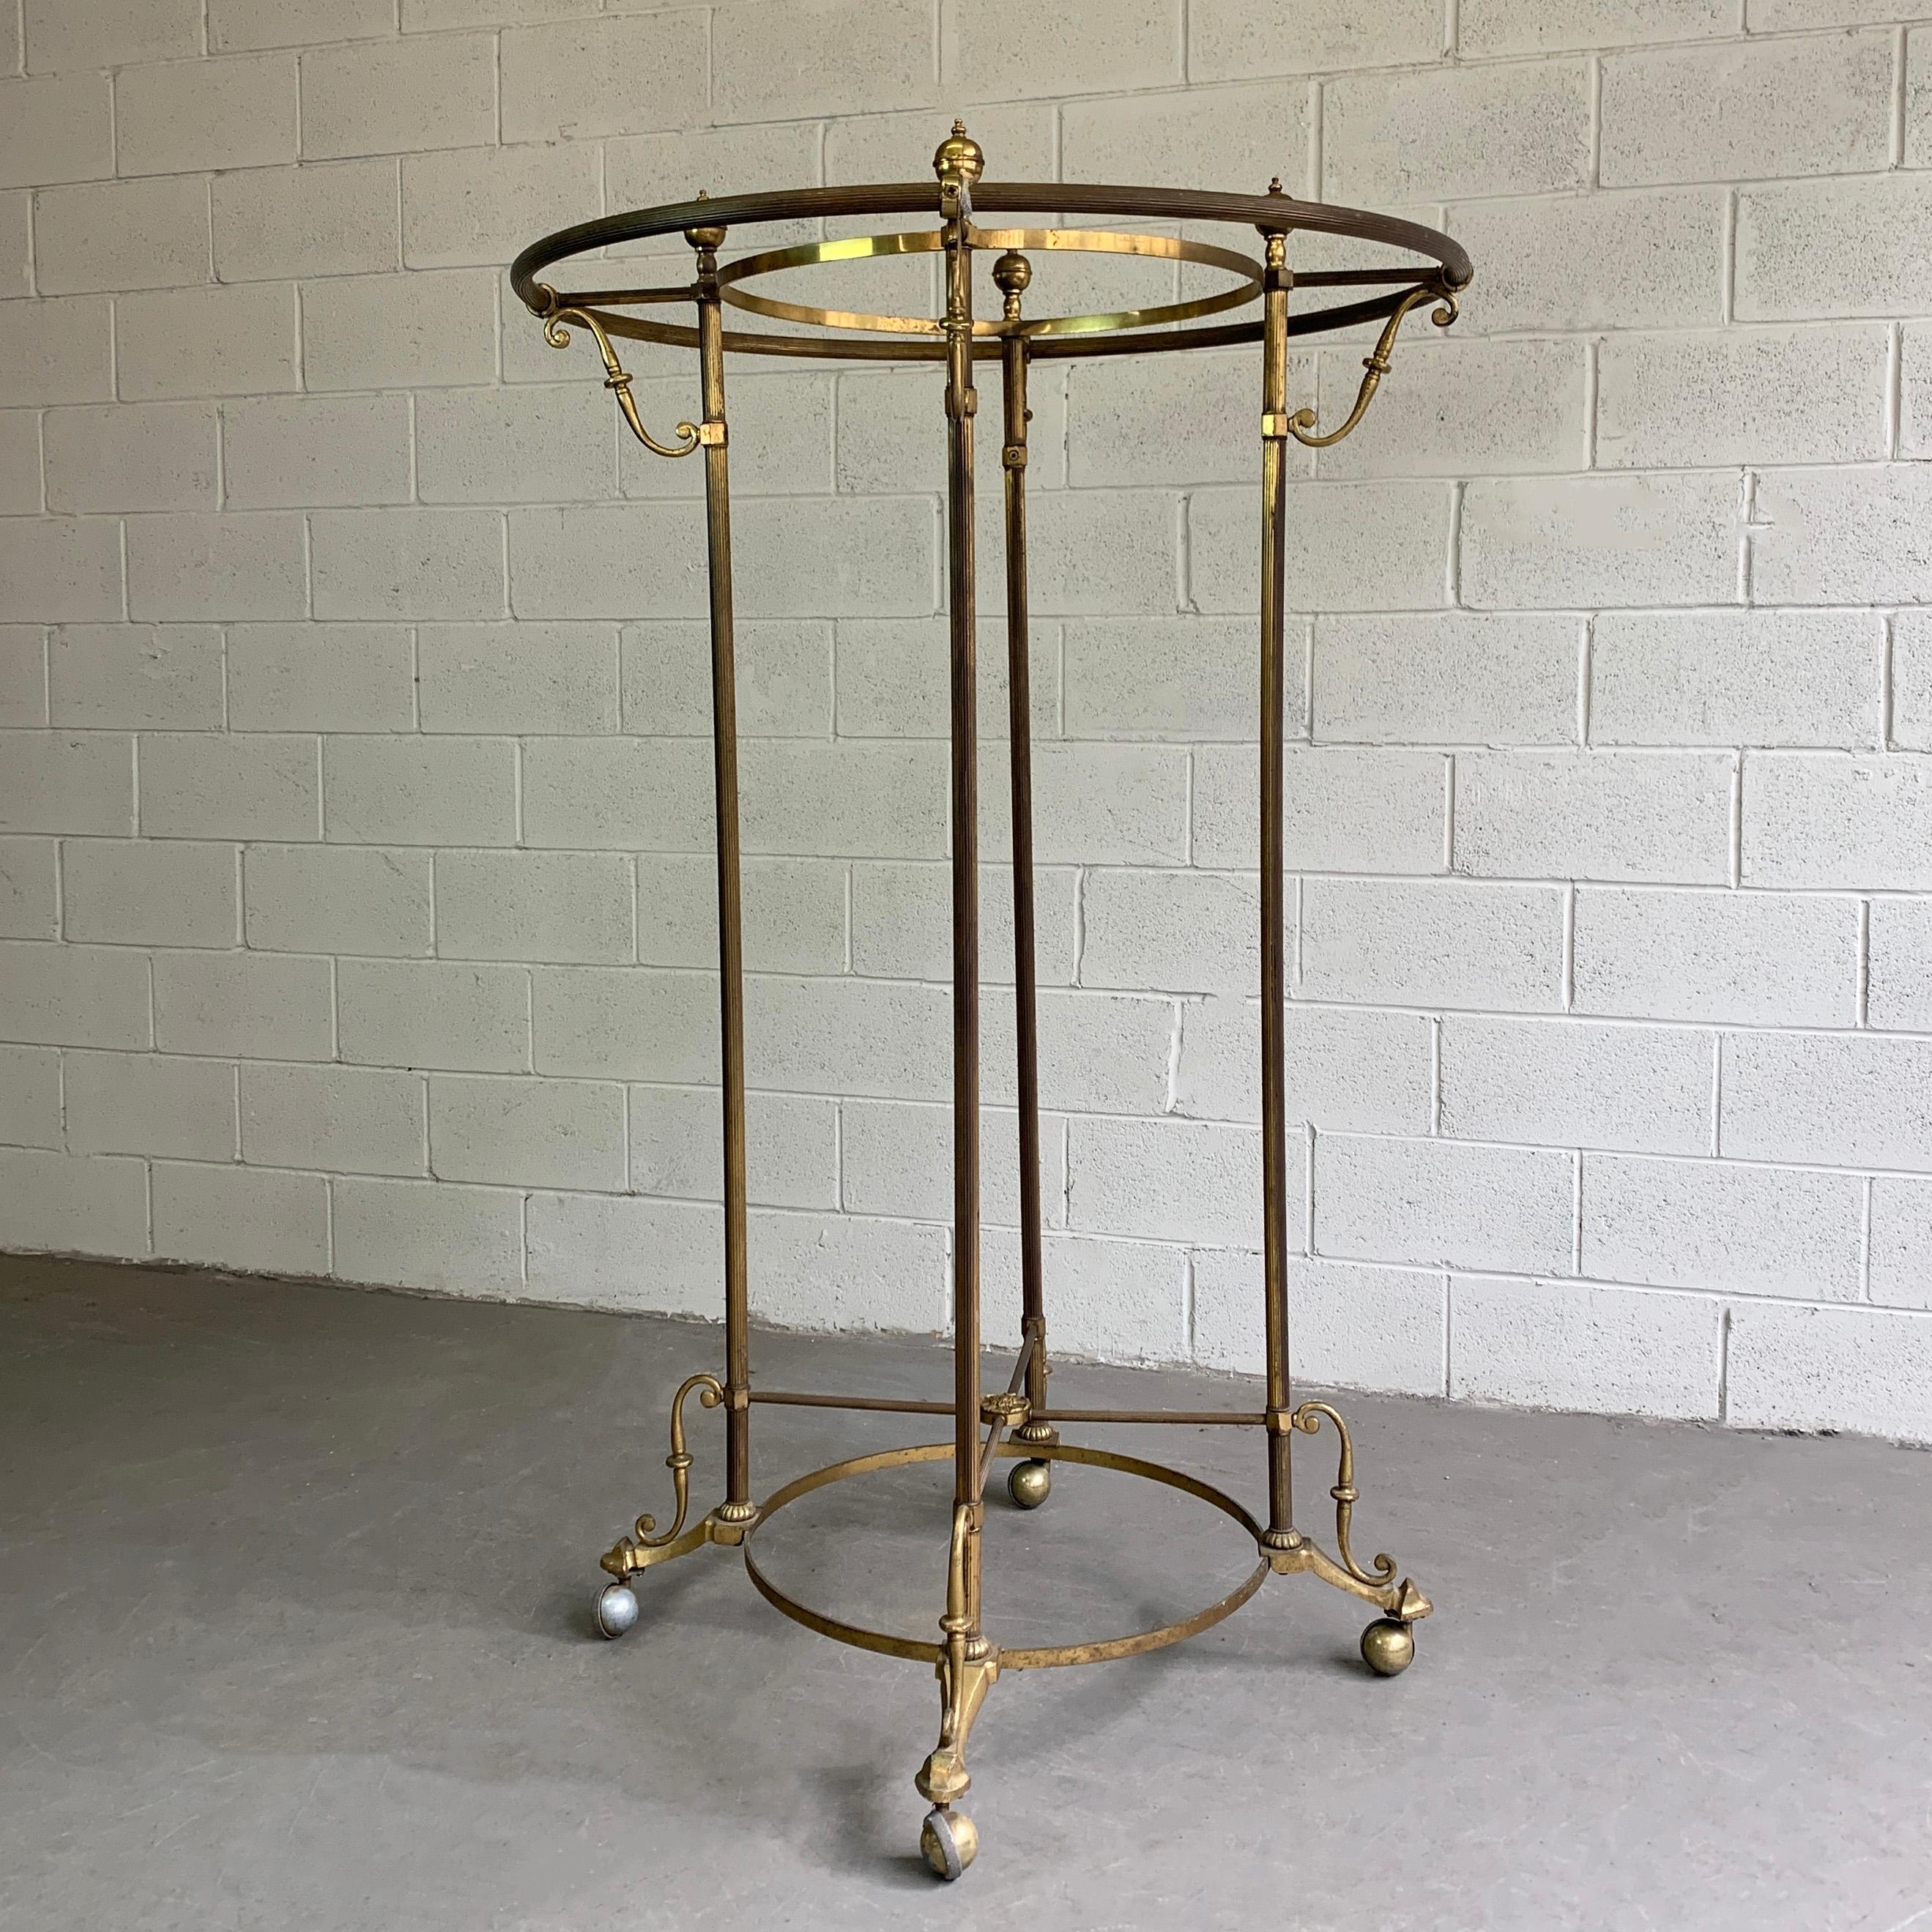 Antique, brass, rolling, rounder, garment rack fearures decorative touches. The 23.5 inch diameter inner ring can accept a glass top shelf.